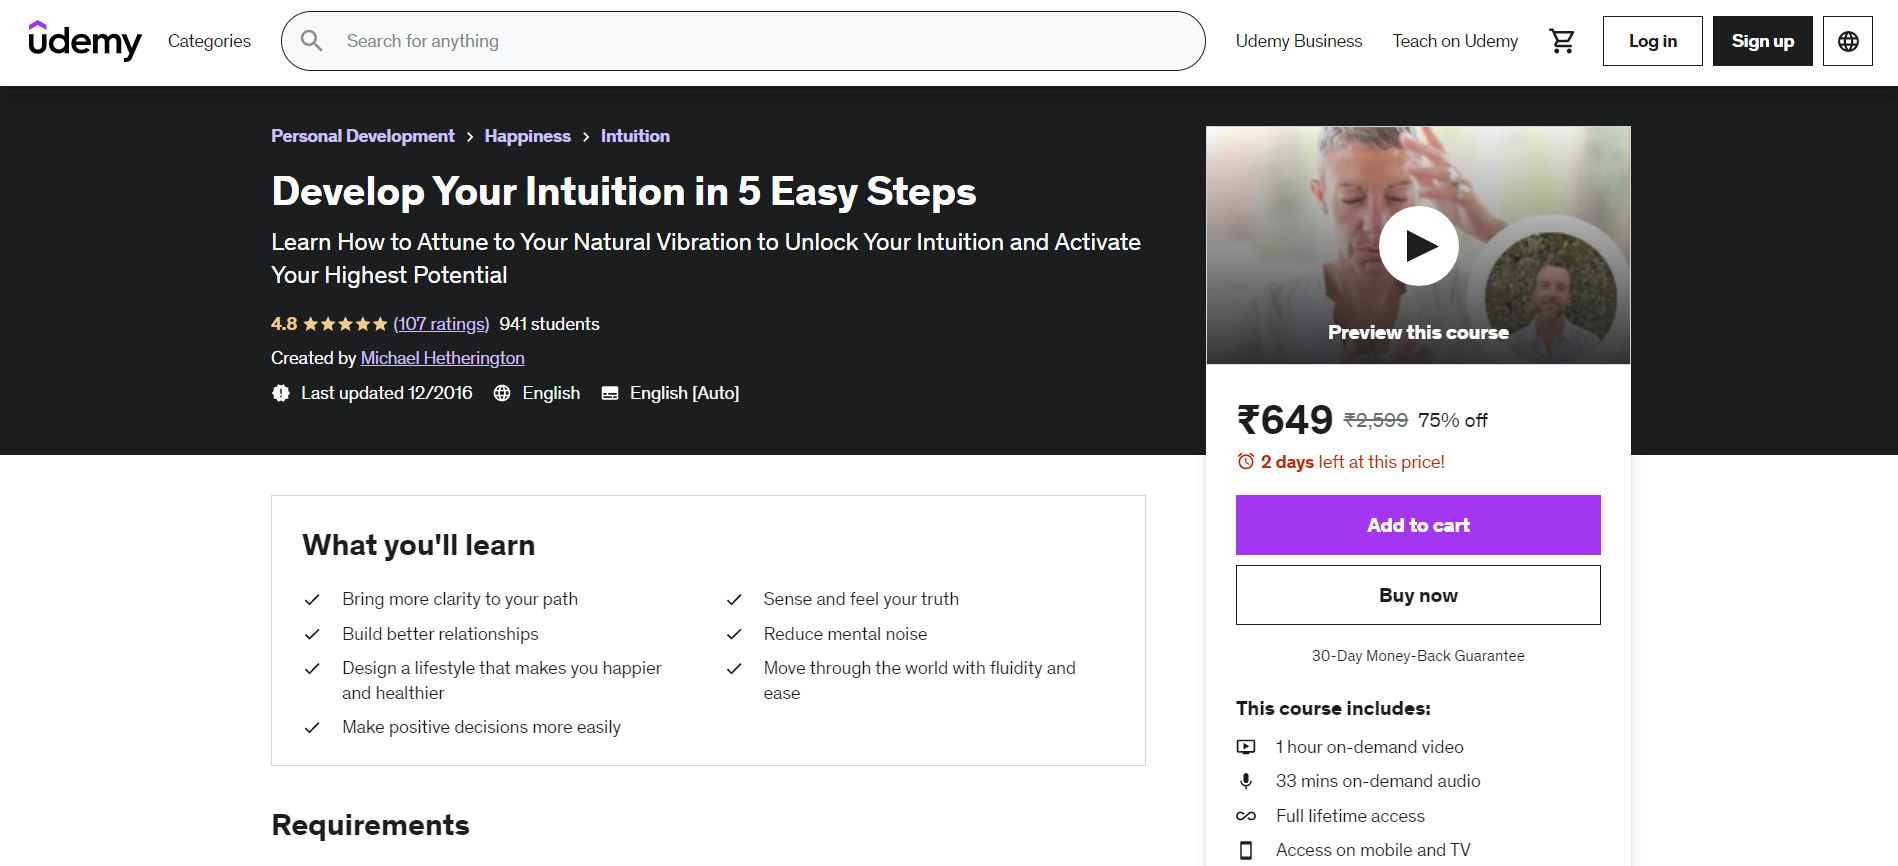 Develop Your Intuition in 5 Easy Steps